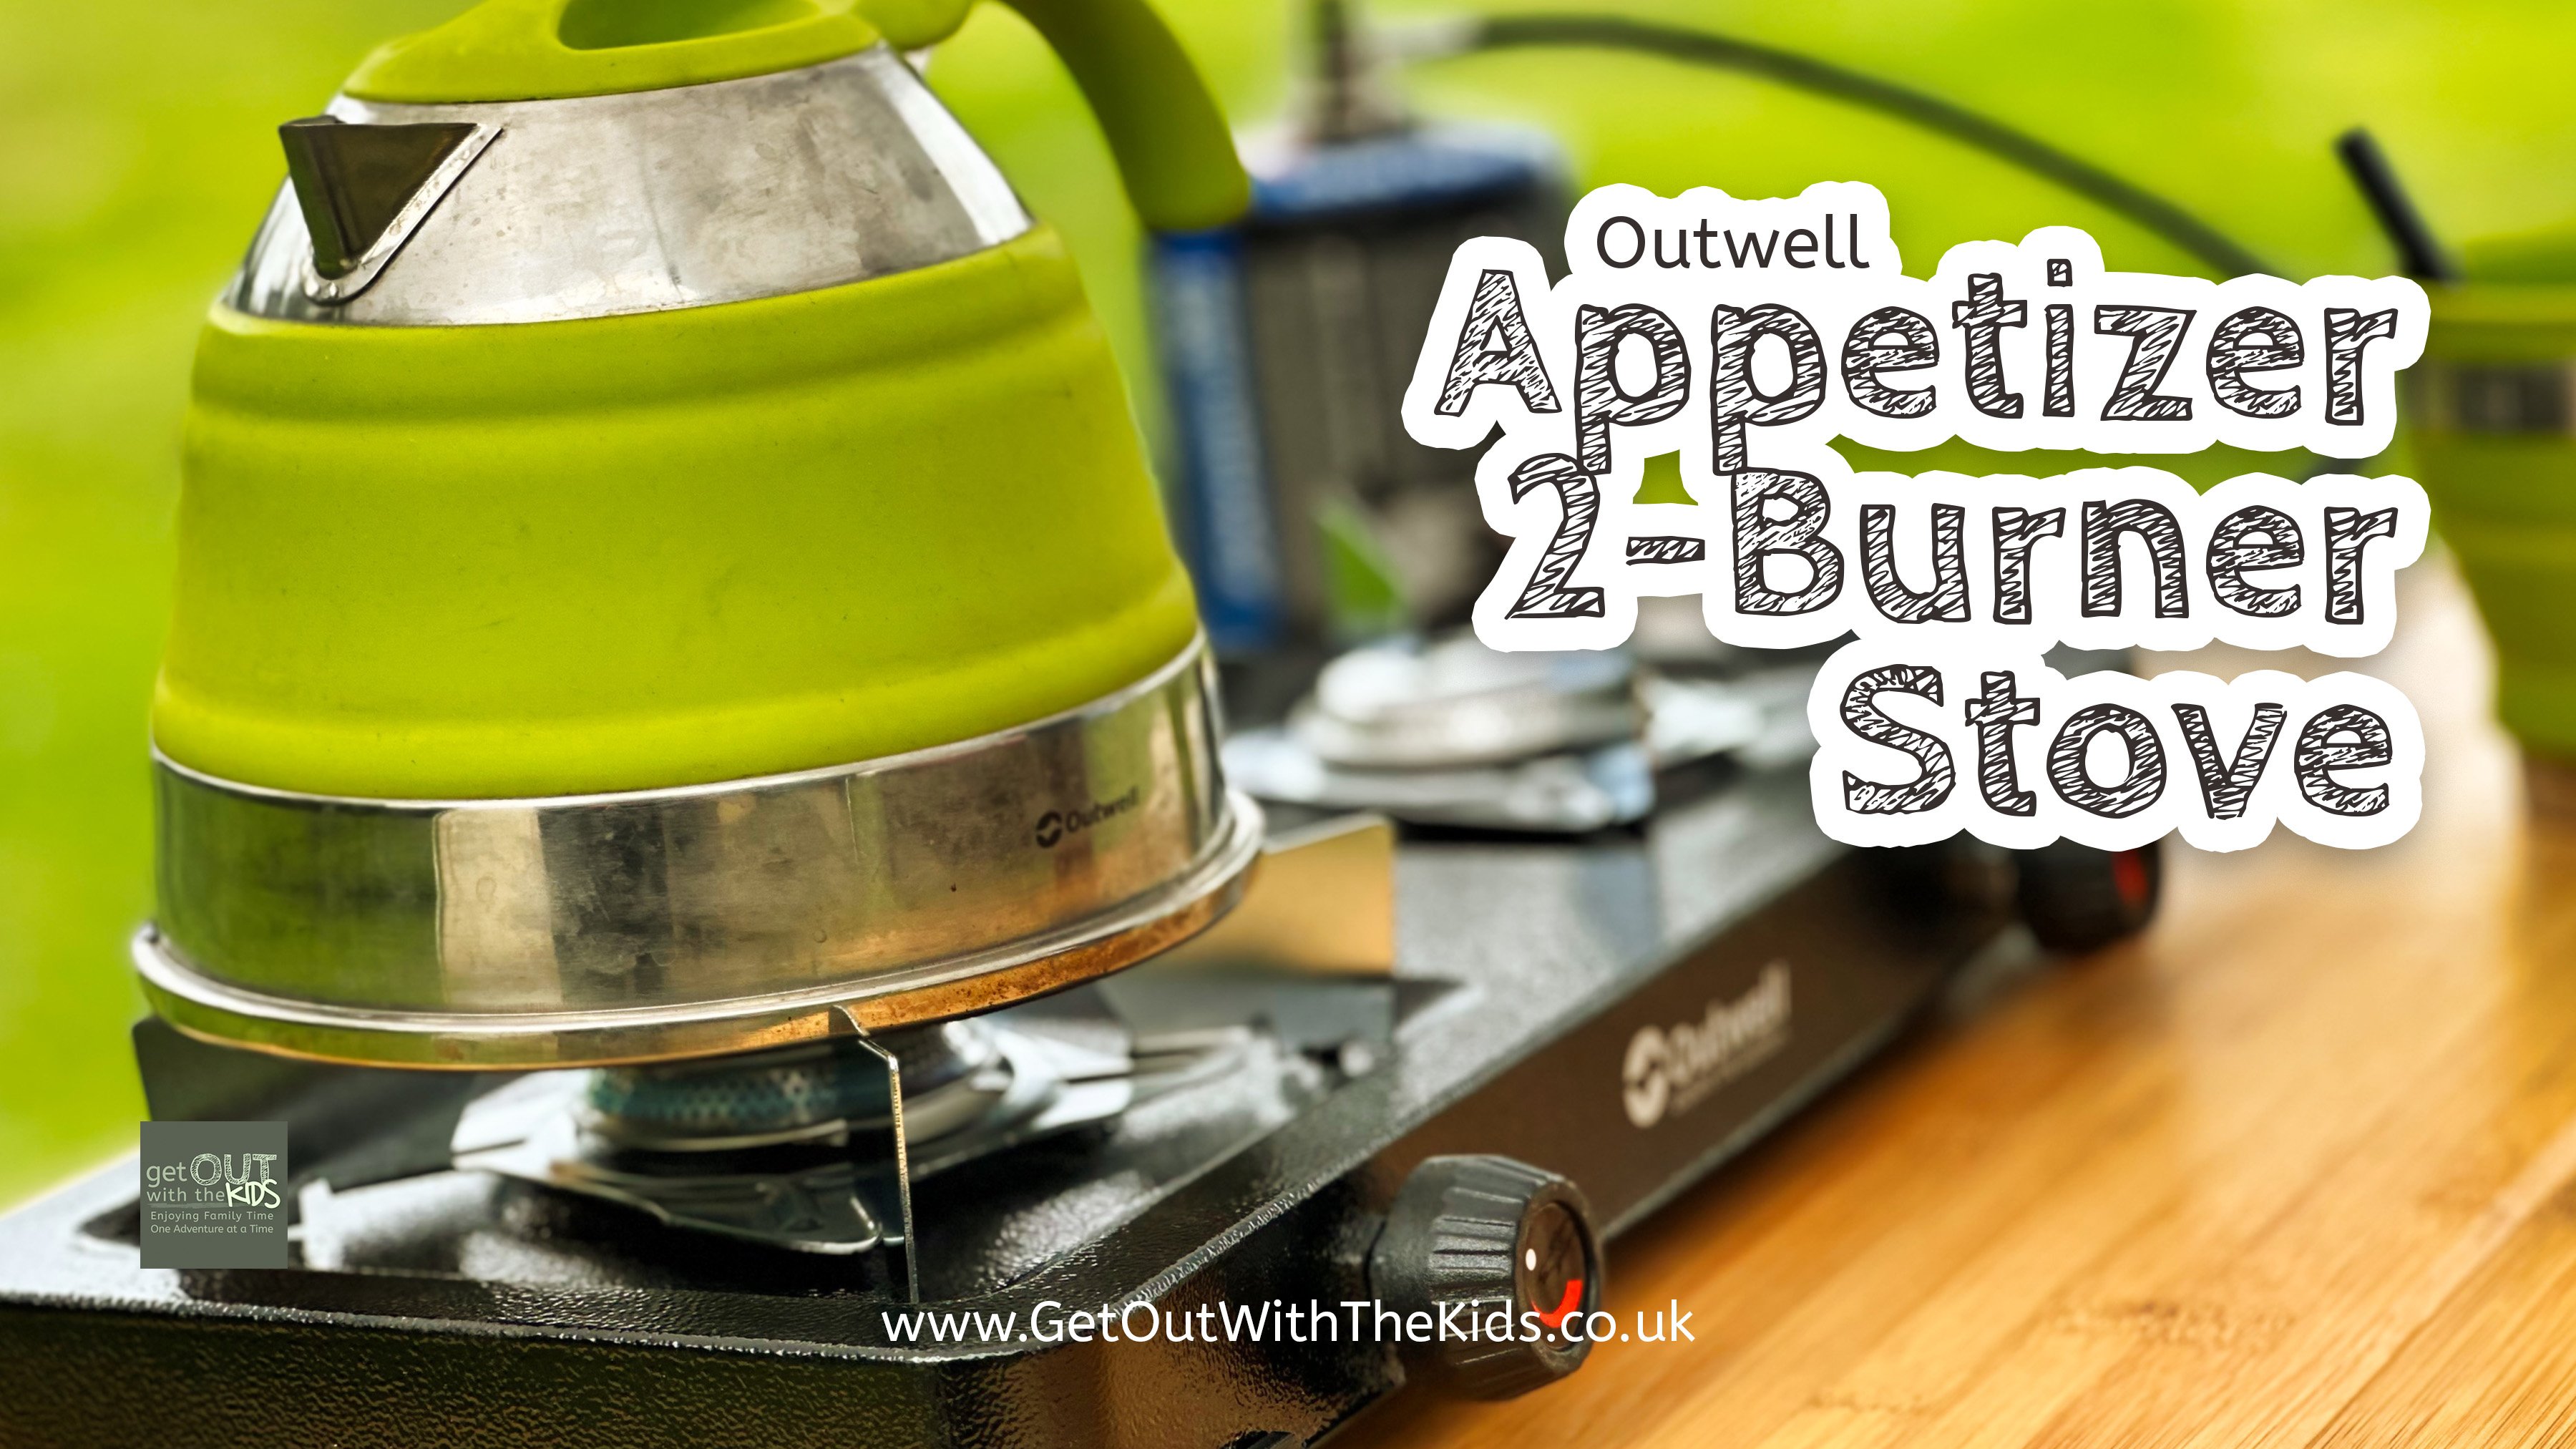 The Outwell Appetizer 2-Burner Stove with an Outwell Collaps Kettle on it